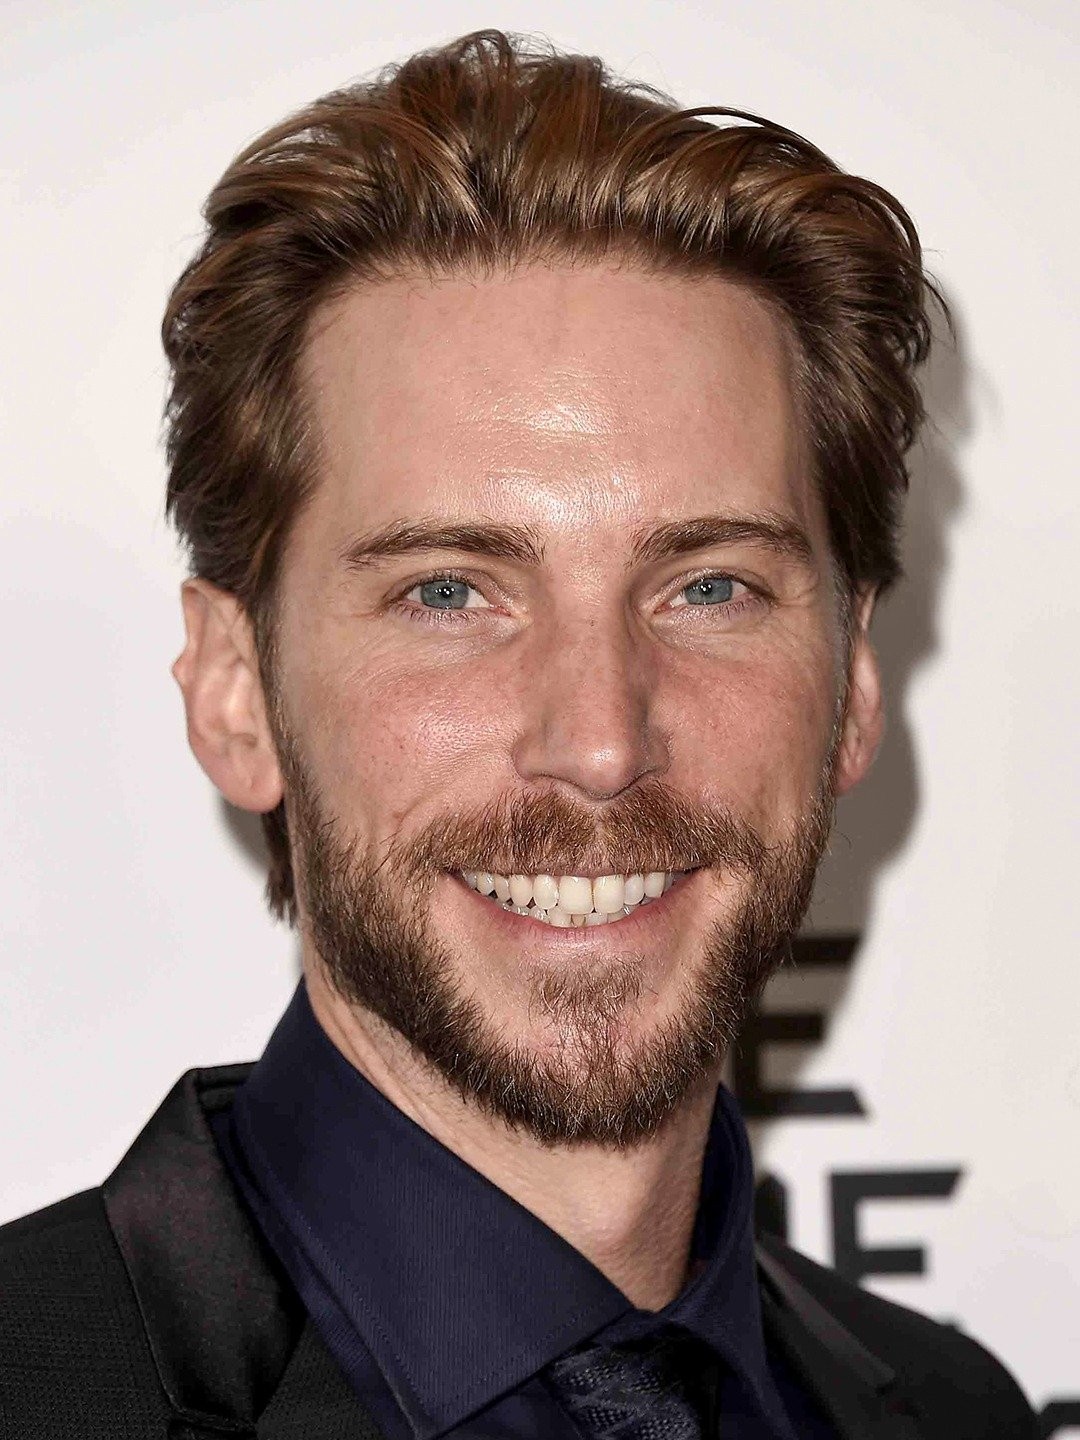 Troy Baker's Most Iconic Video Game Voice Acting Roles